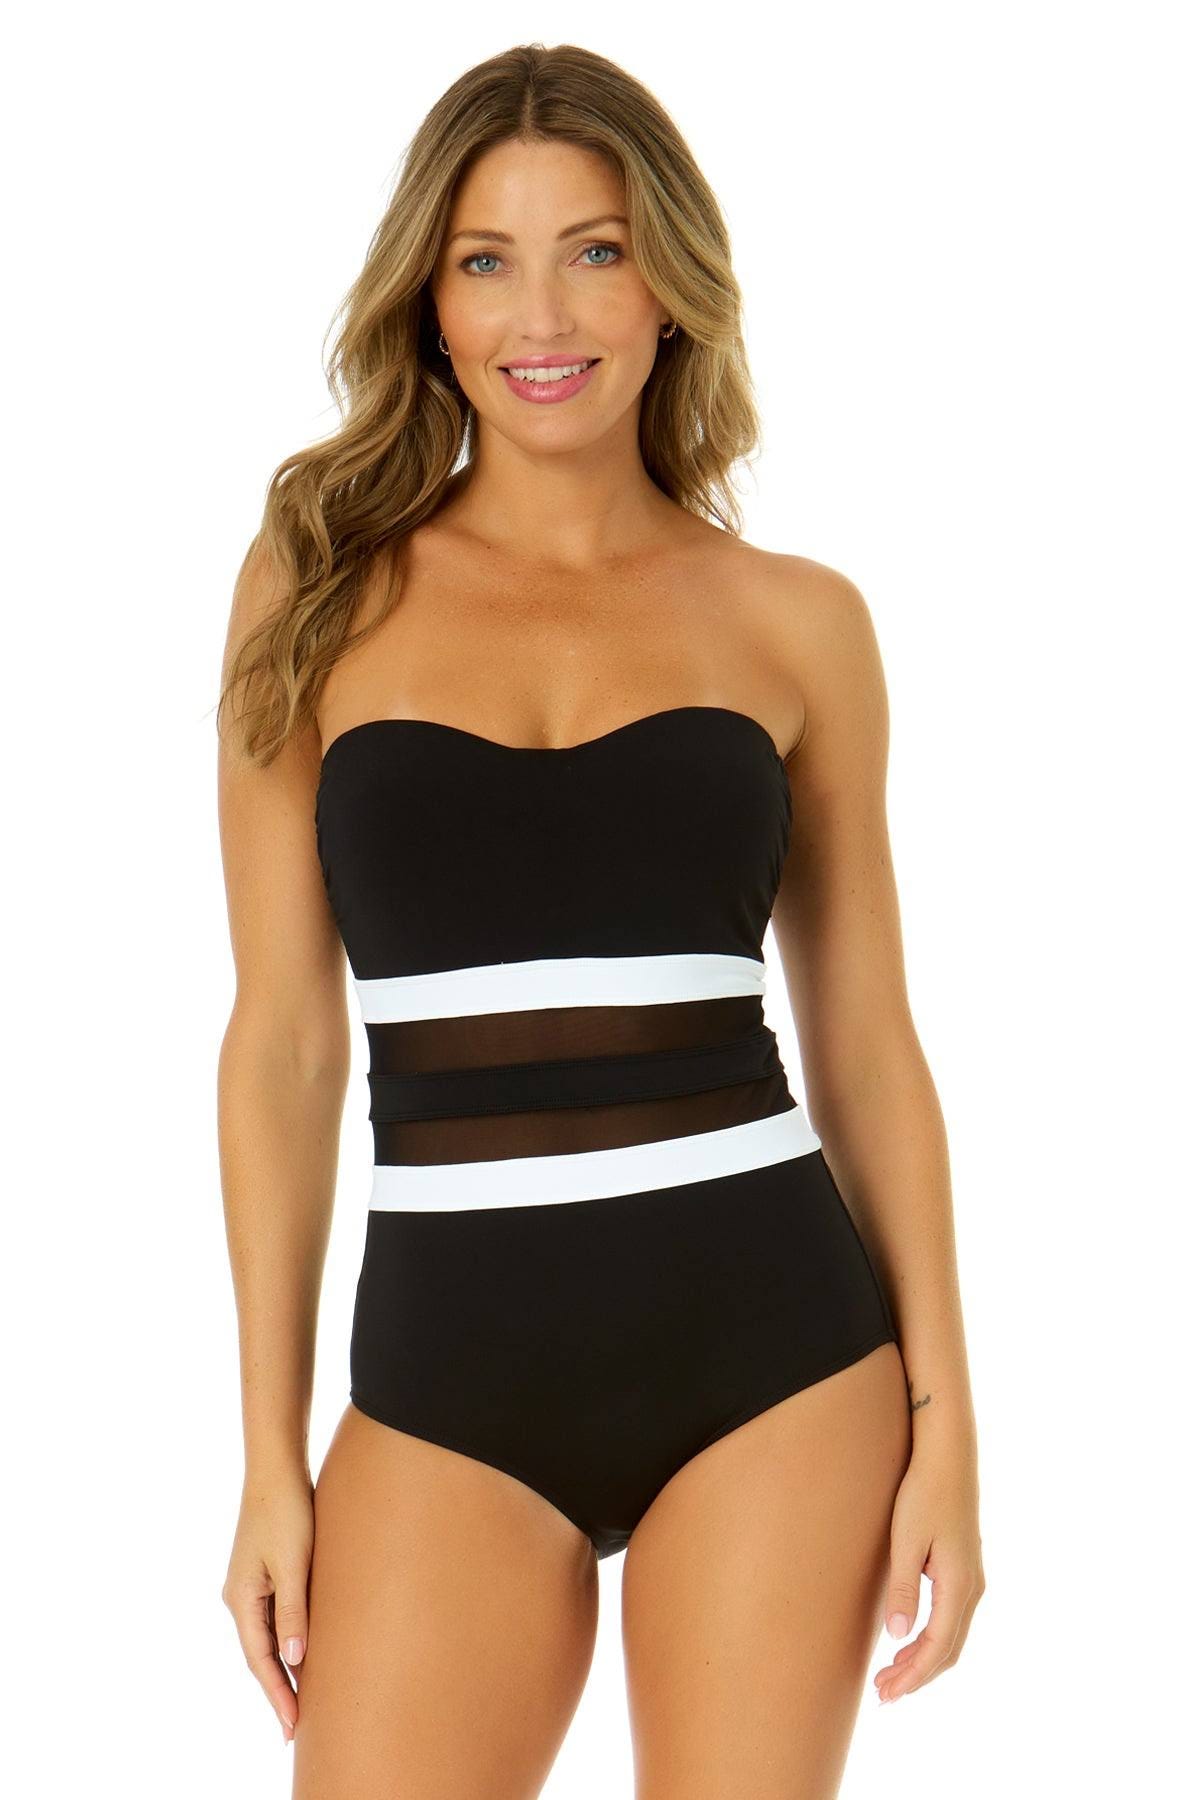 Adjustable Strapless Swimsuit for Summer | Image